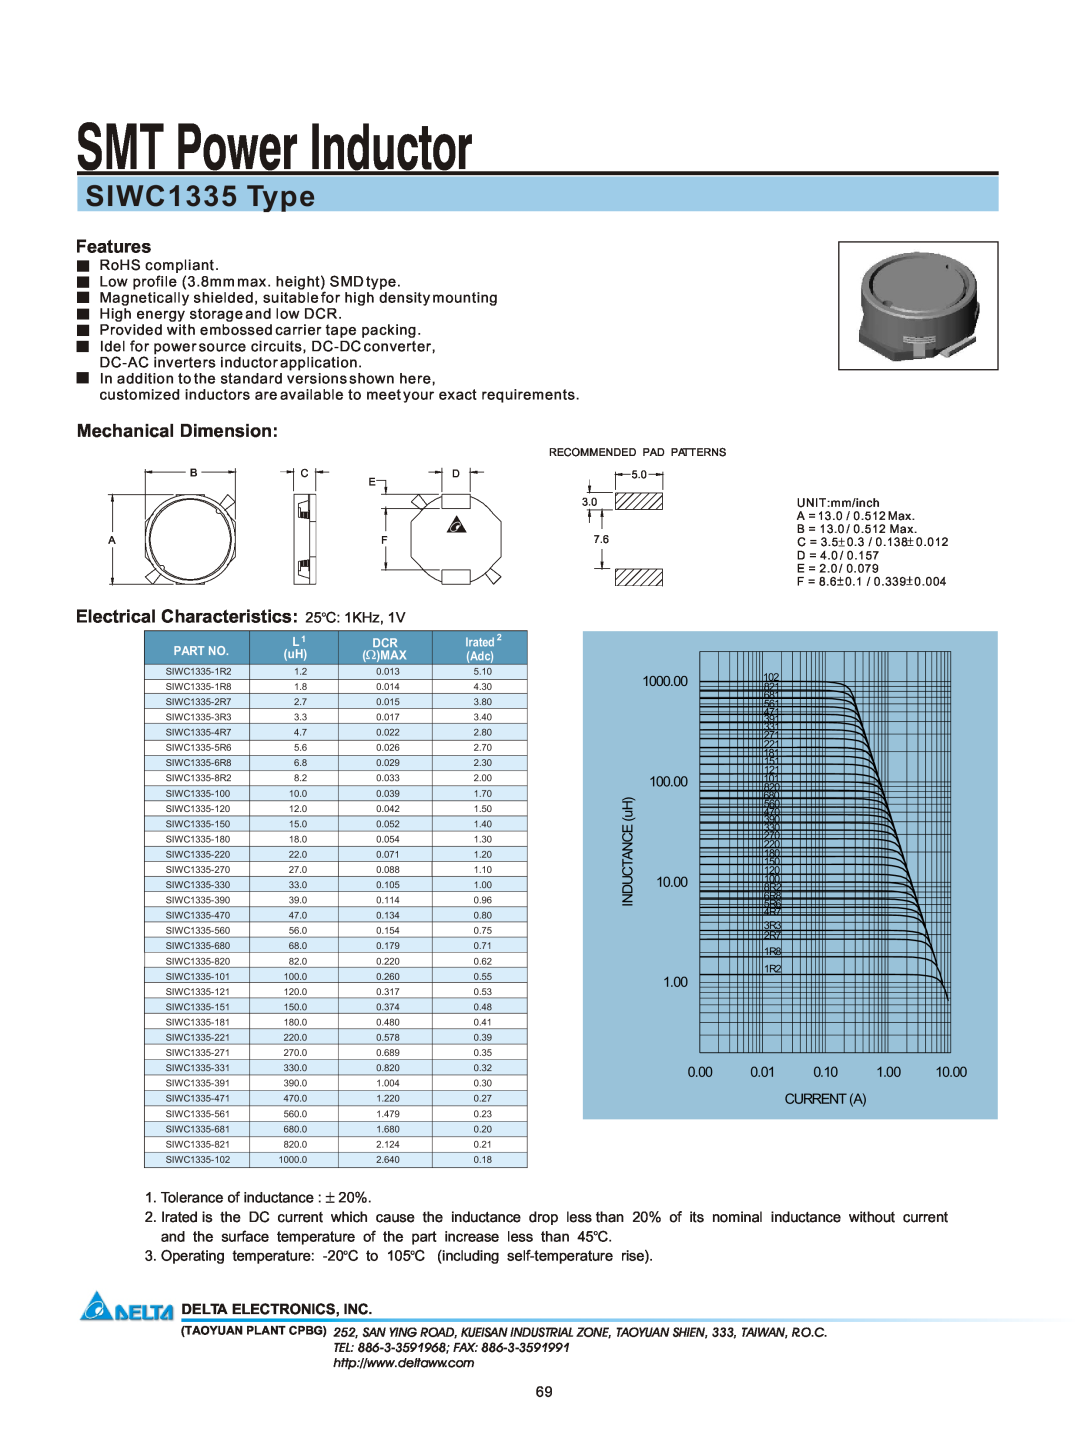 Delta Electronics manual SMT Power Inductor, SIWC1335 Type, Features, Mechanical Dimension, Delta Electronics, Inc 